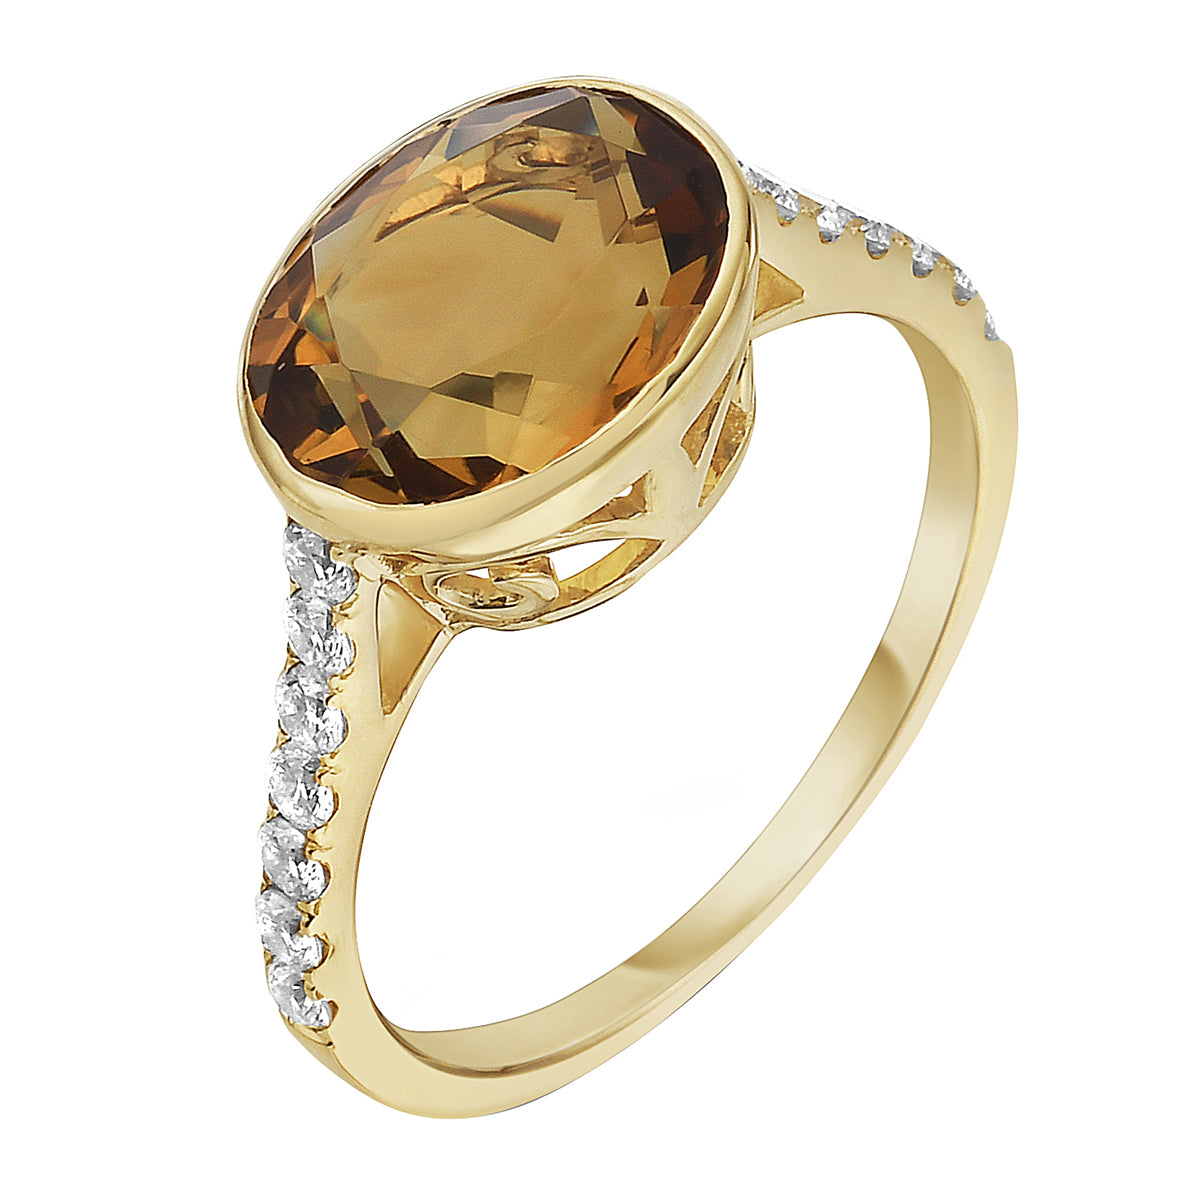 Ring 14KY/2.2G 1CIT-2.66CT 14RD-0.34CT Citrin